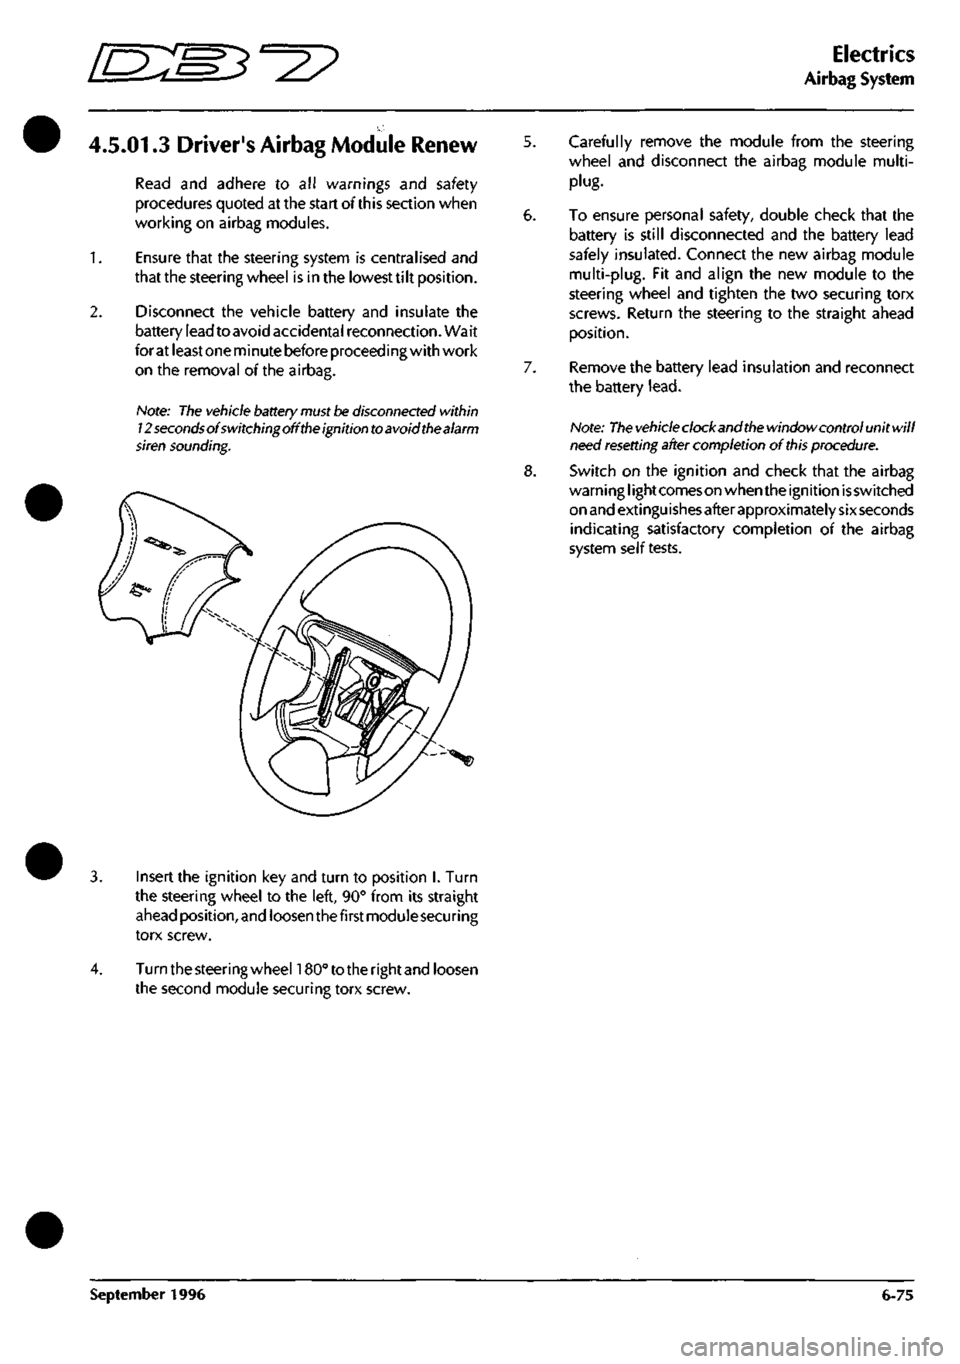 ASTON MARTIN DB7 1997  Workshop Manual 
=2? 
Electrics 
Airbag System 
4.5.01.3 Drivers Airbag Module Renew 
Read and adhere to all warnings and safety 
procedures quoted at the start of this section when 
working on airbag modules. 

1.